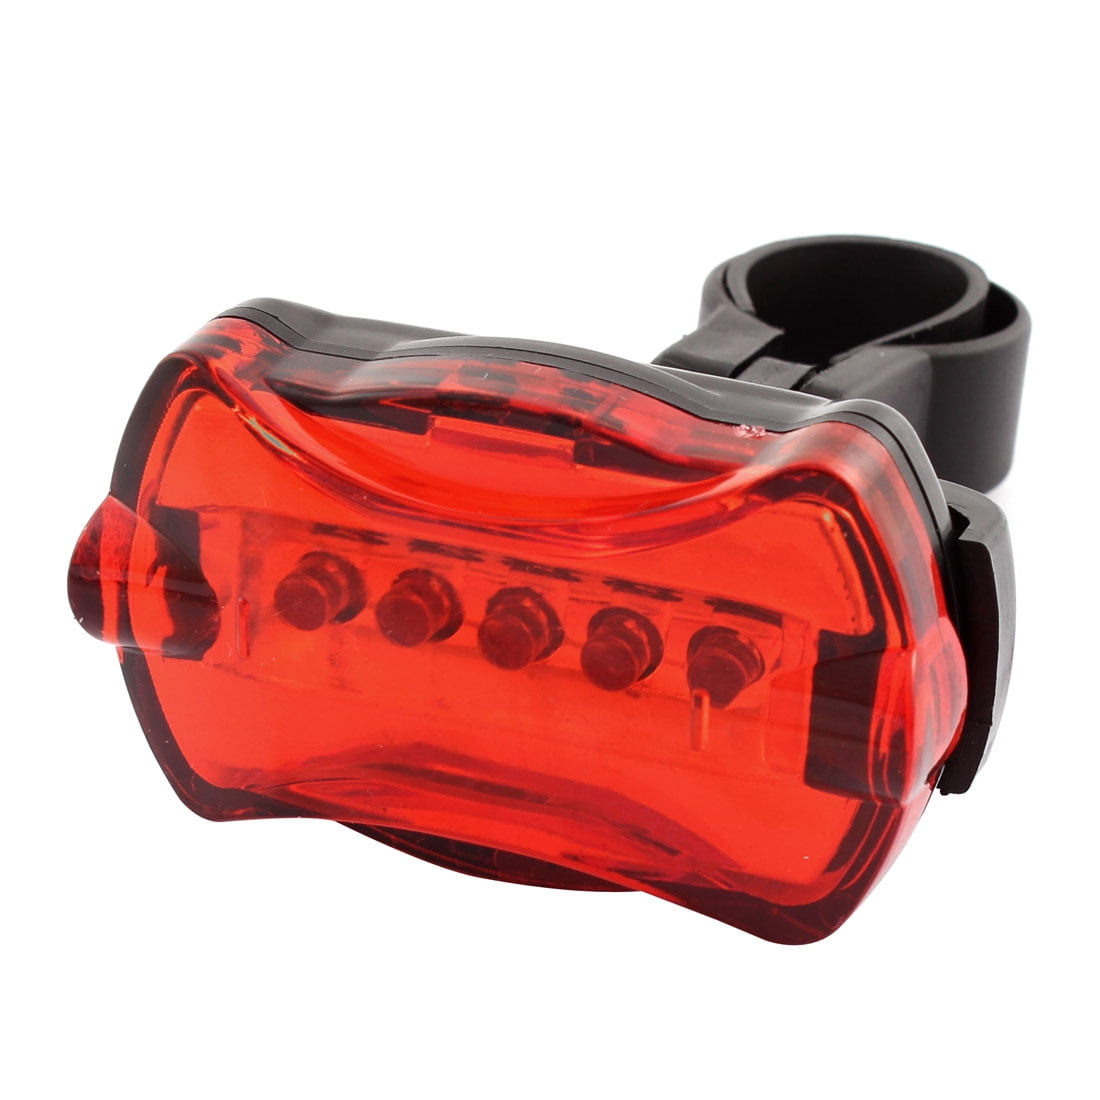 BikeGearz Cycling Flashing Rear Safety Tail Light with 6 Modes Bicycle tm High Intensity Red 5 LED Bike 